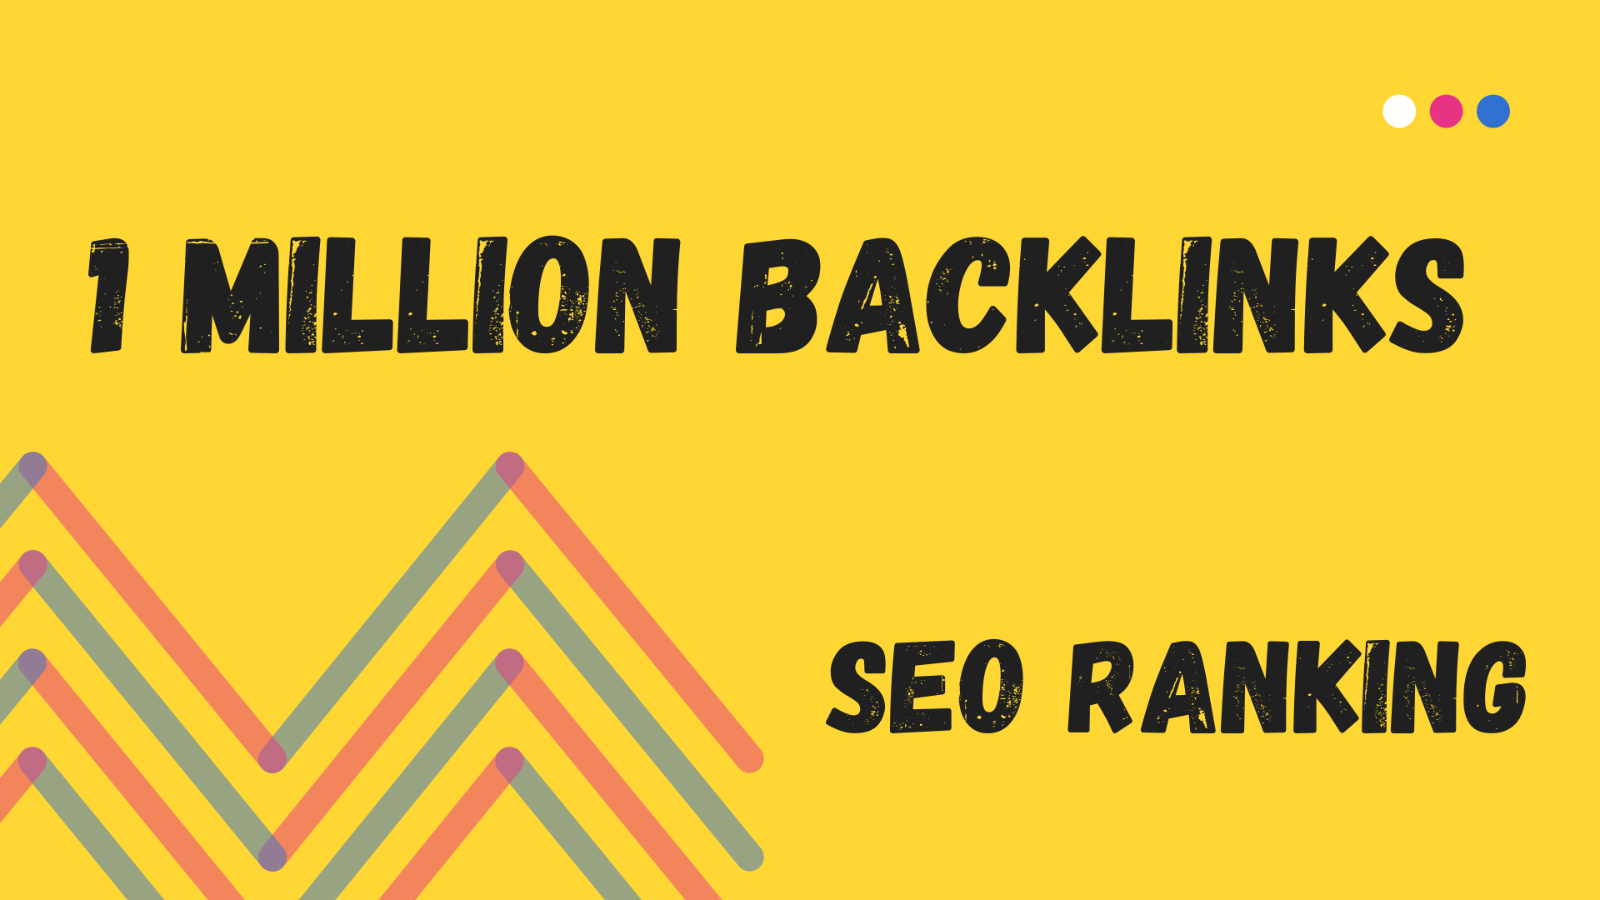 1 Million SEO-Backlinks for website, personal content website, video, page - SEO RANKING